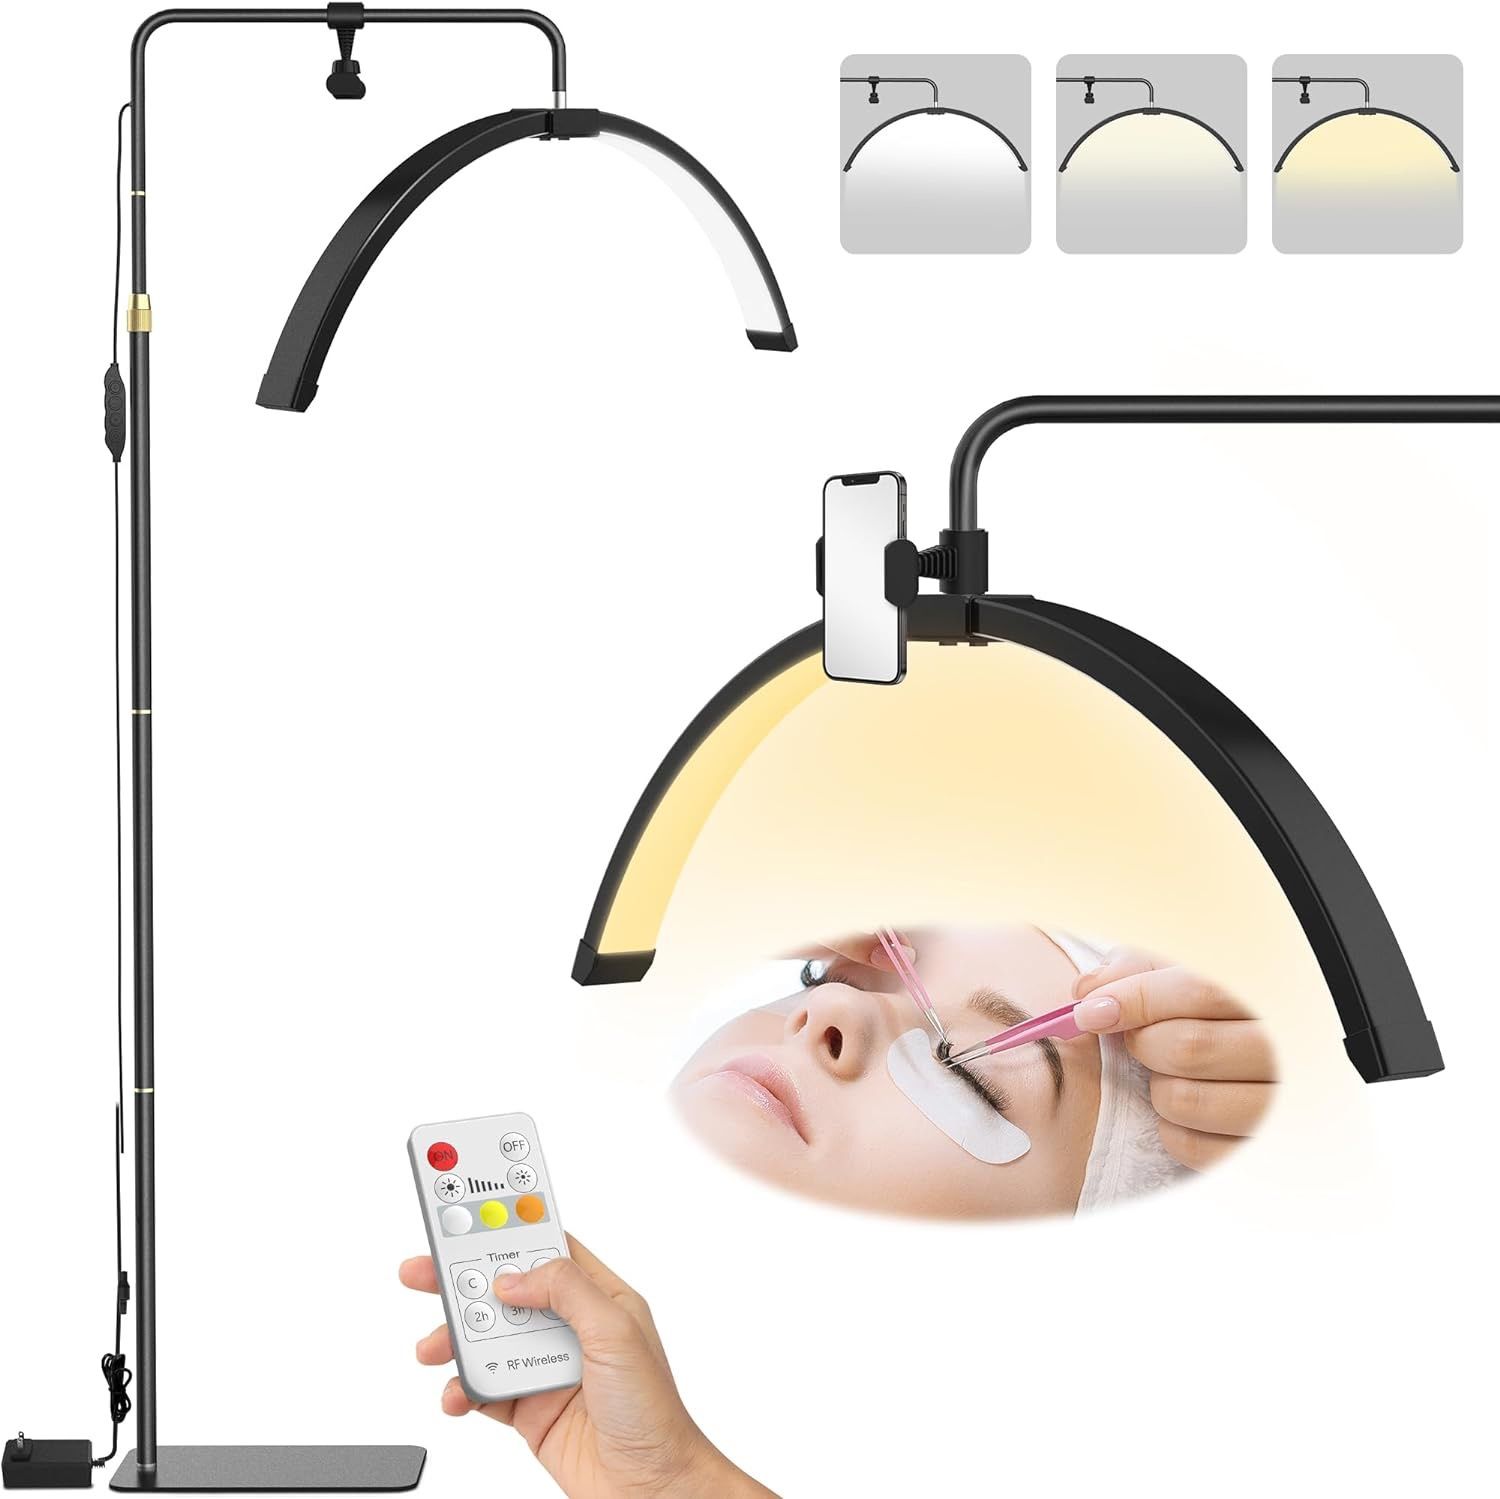 Lash Light for Eyelash Extensions, 3 Color Modes Esthetician Light with Phone Holder, Half Moon Lamp for Lashes, Height Adjustable LED Floor Lash Lamp